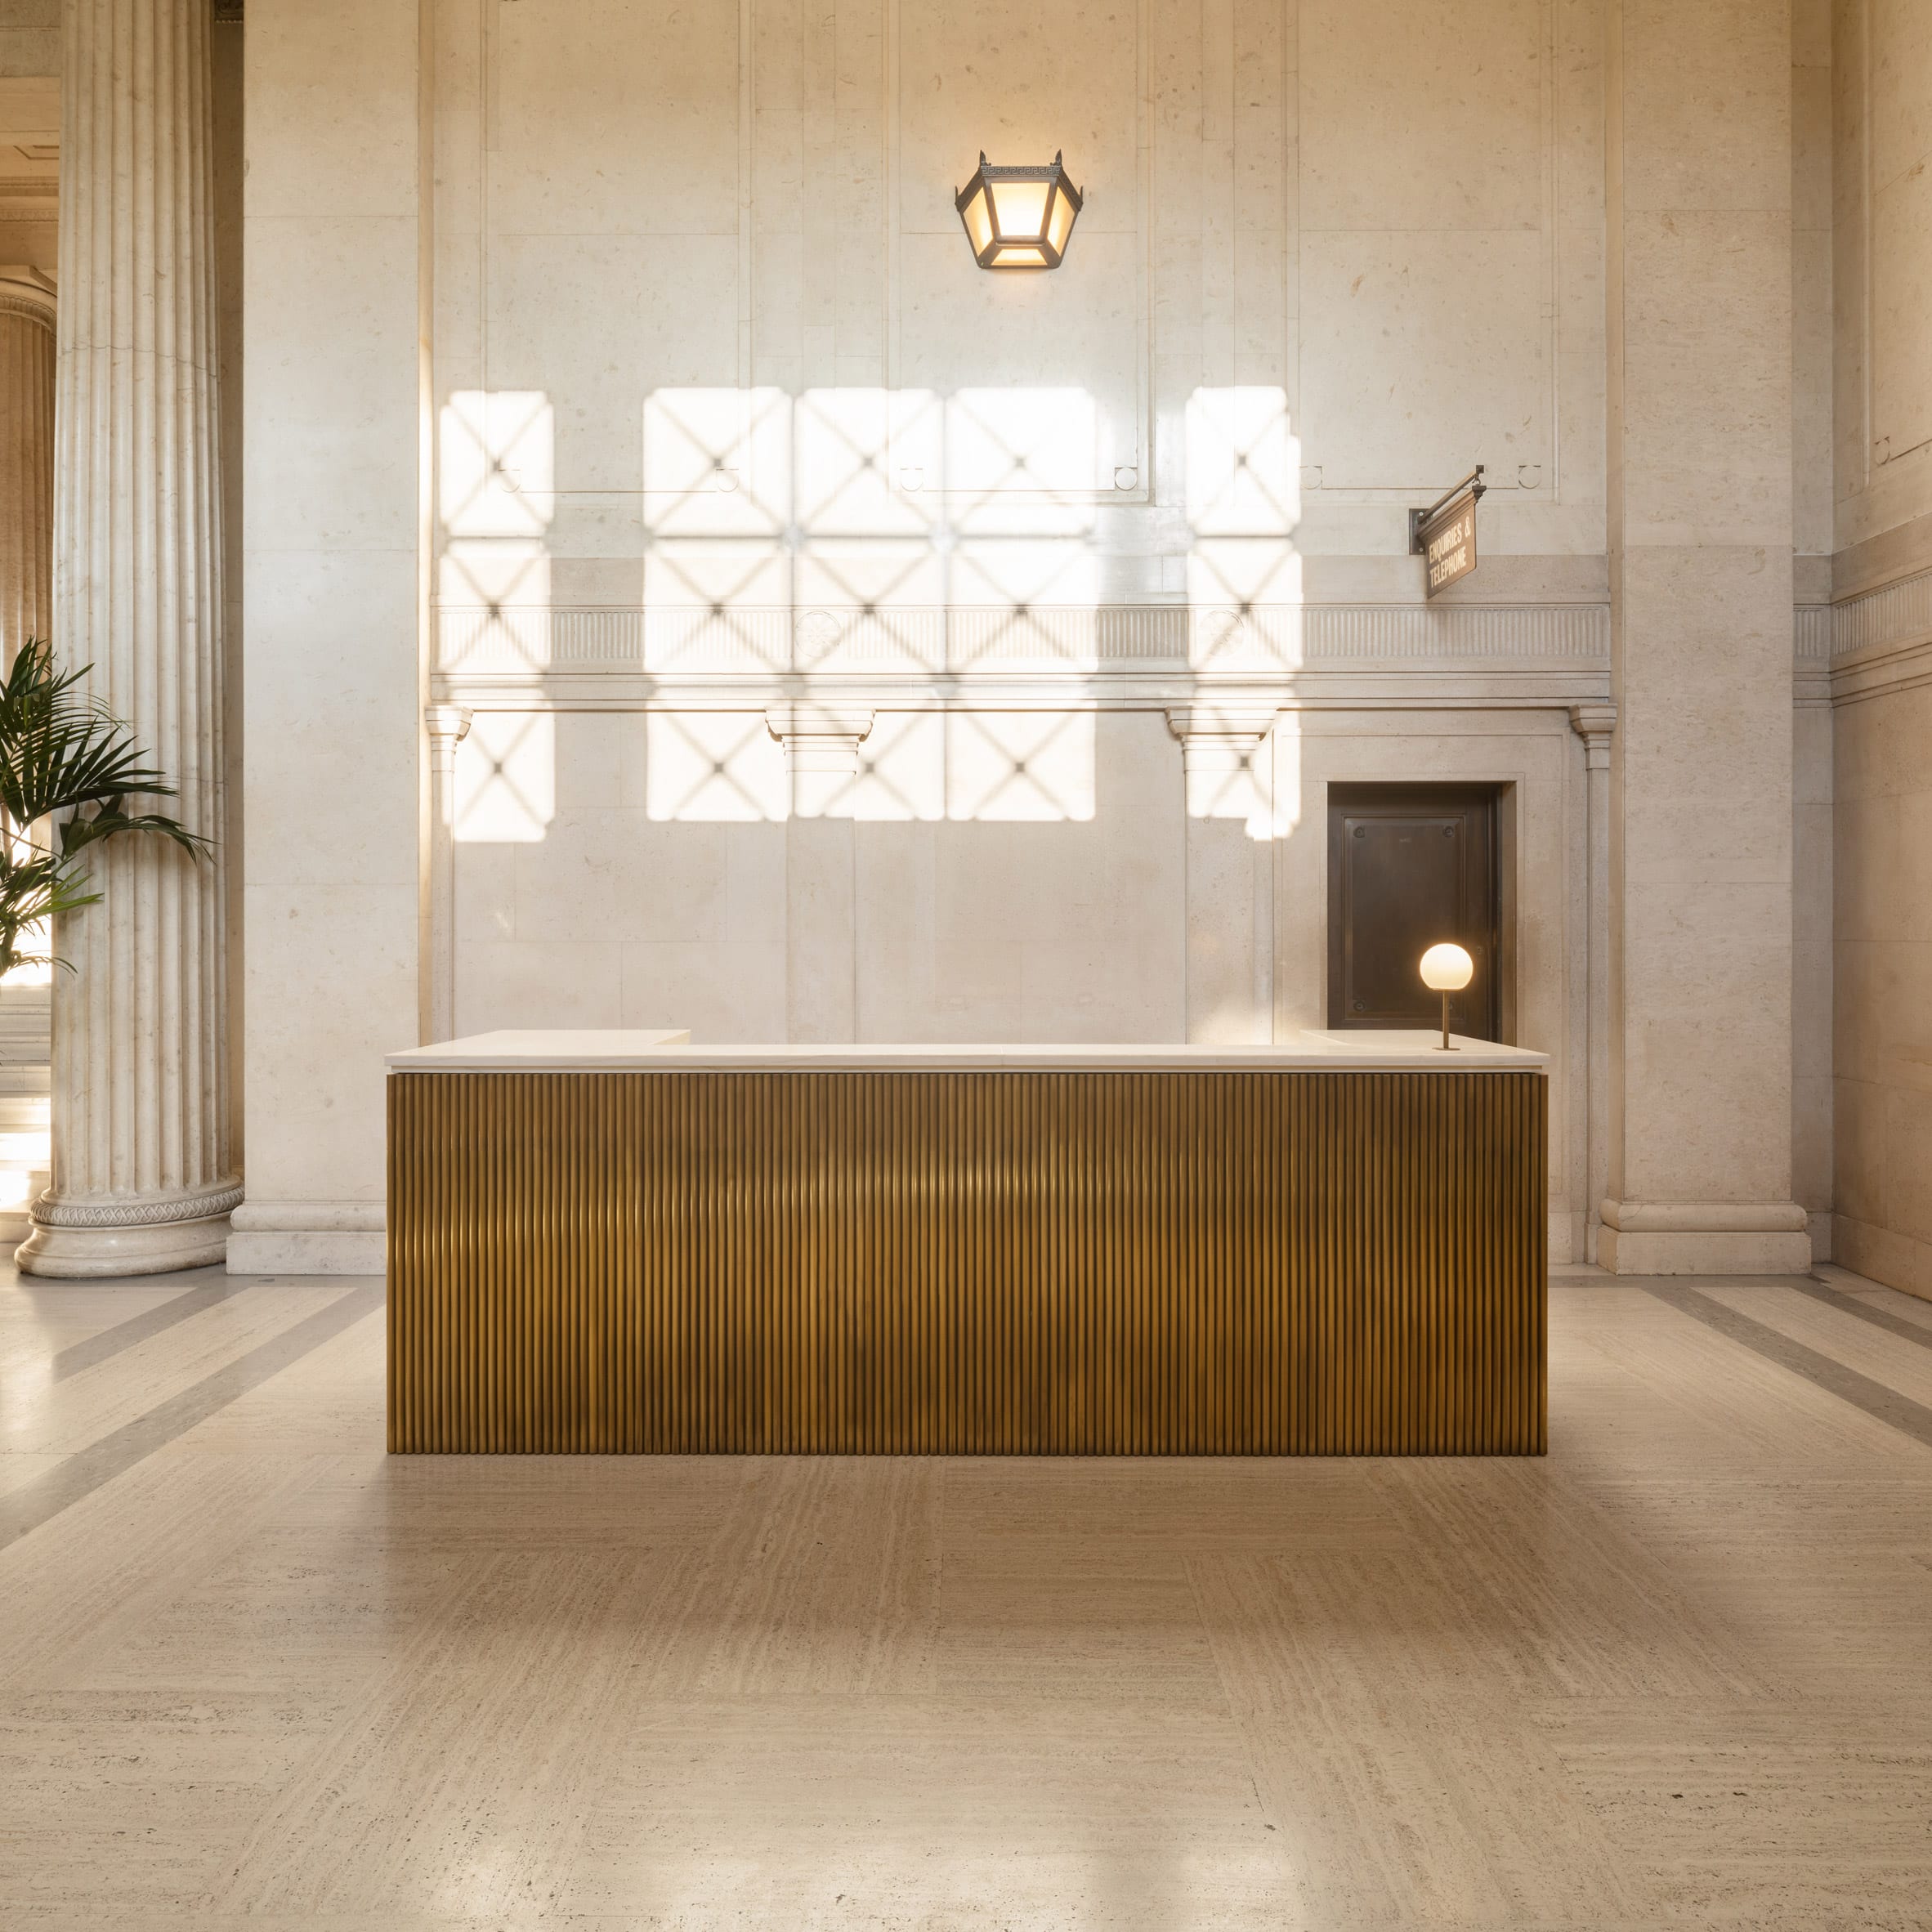 Gold-coloured counter with orb light in Victoria House office interior